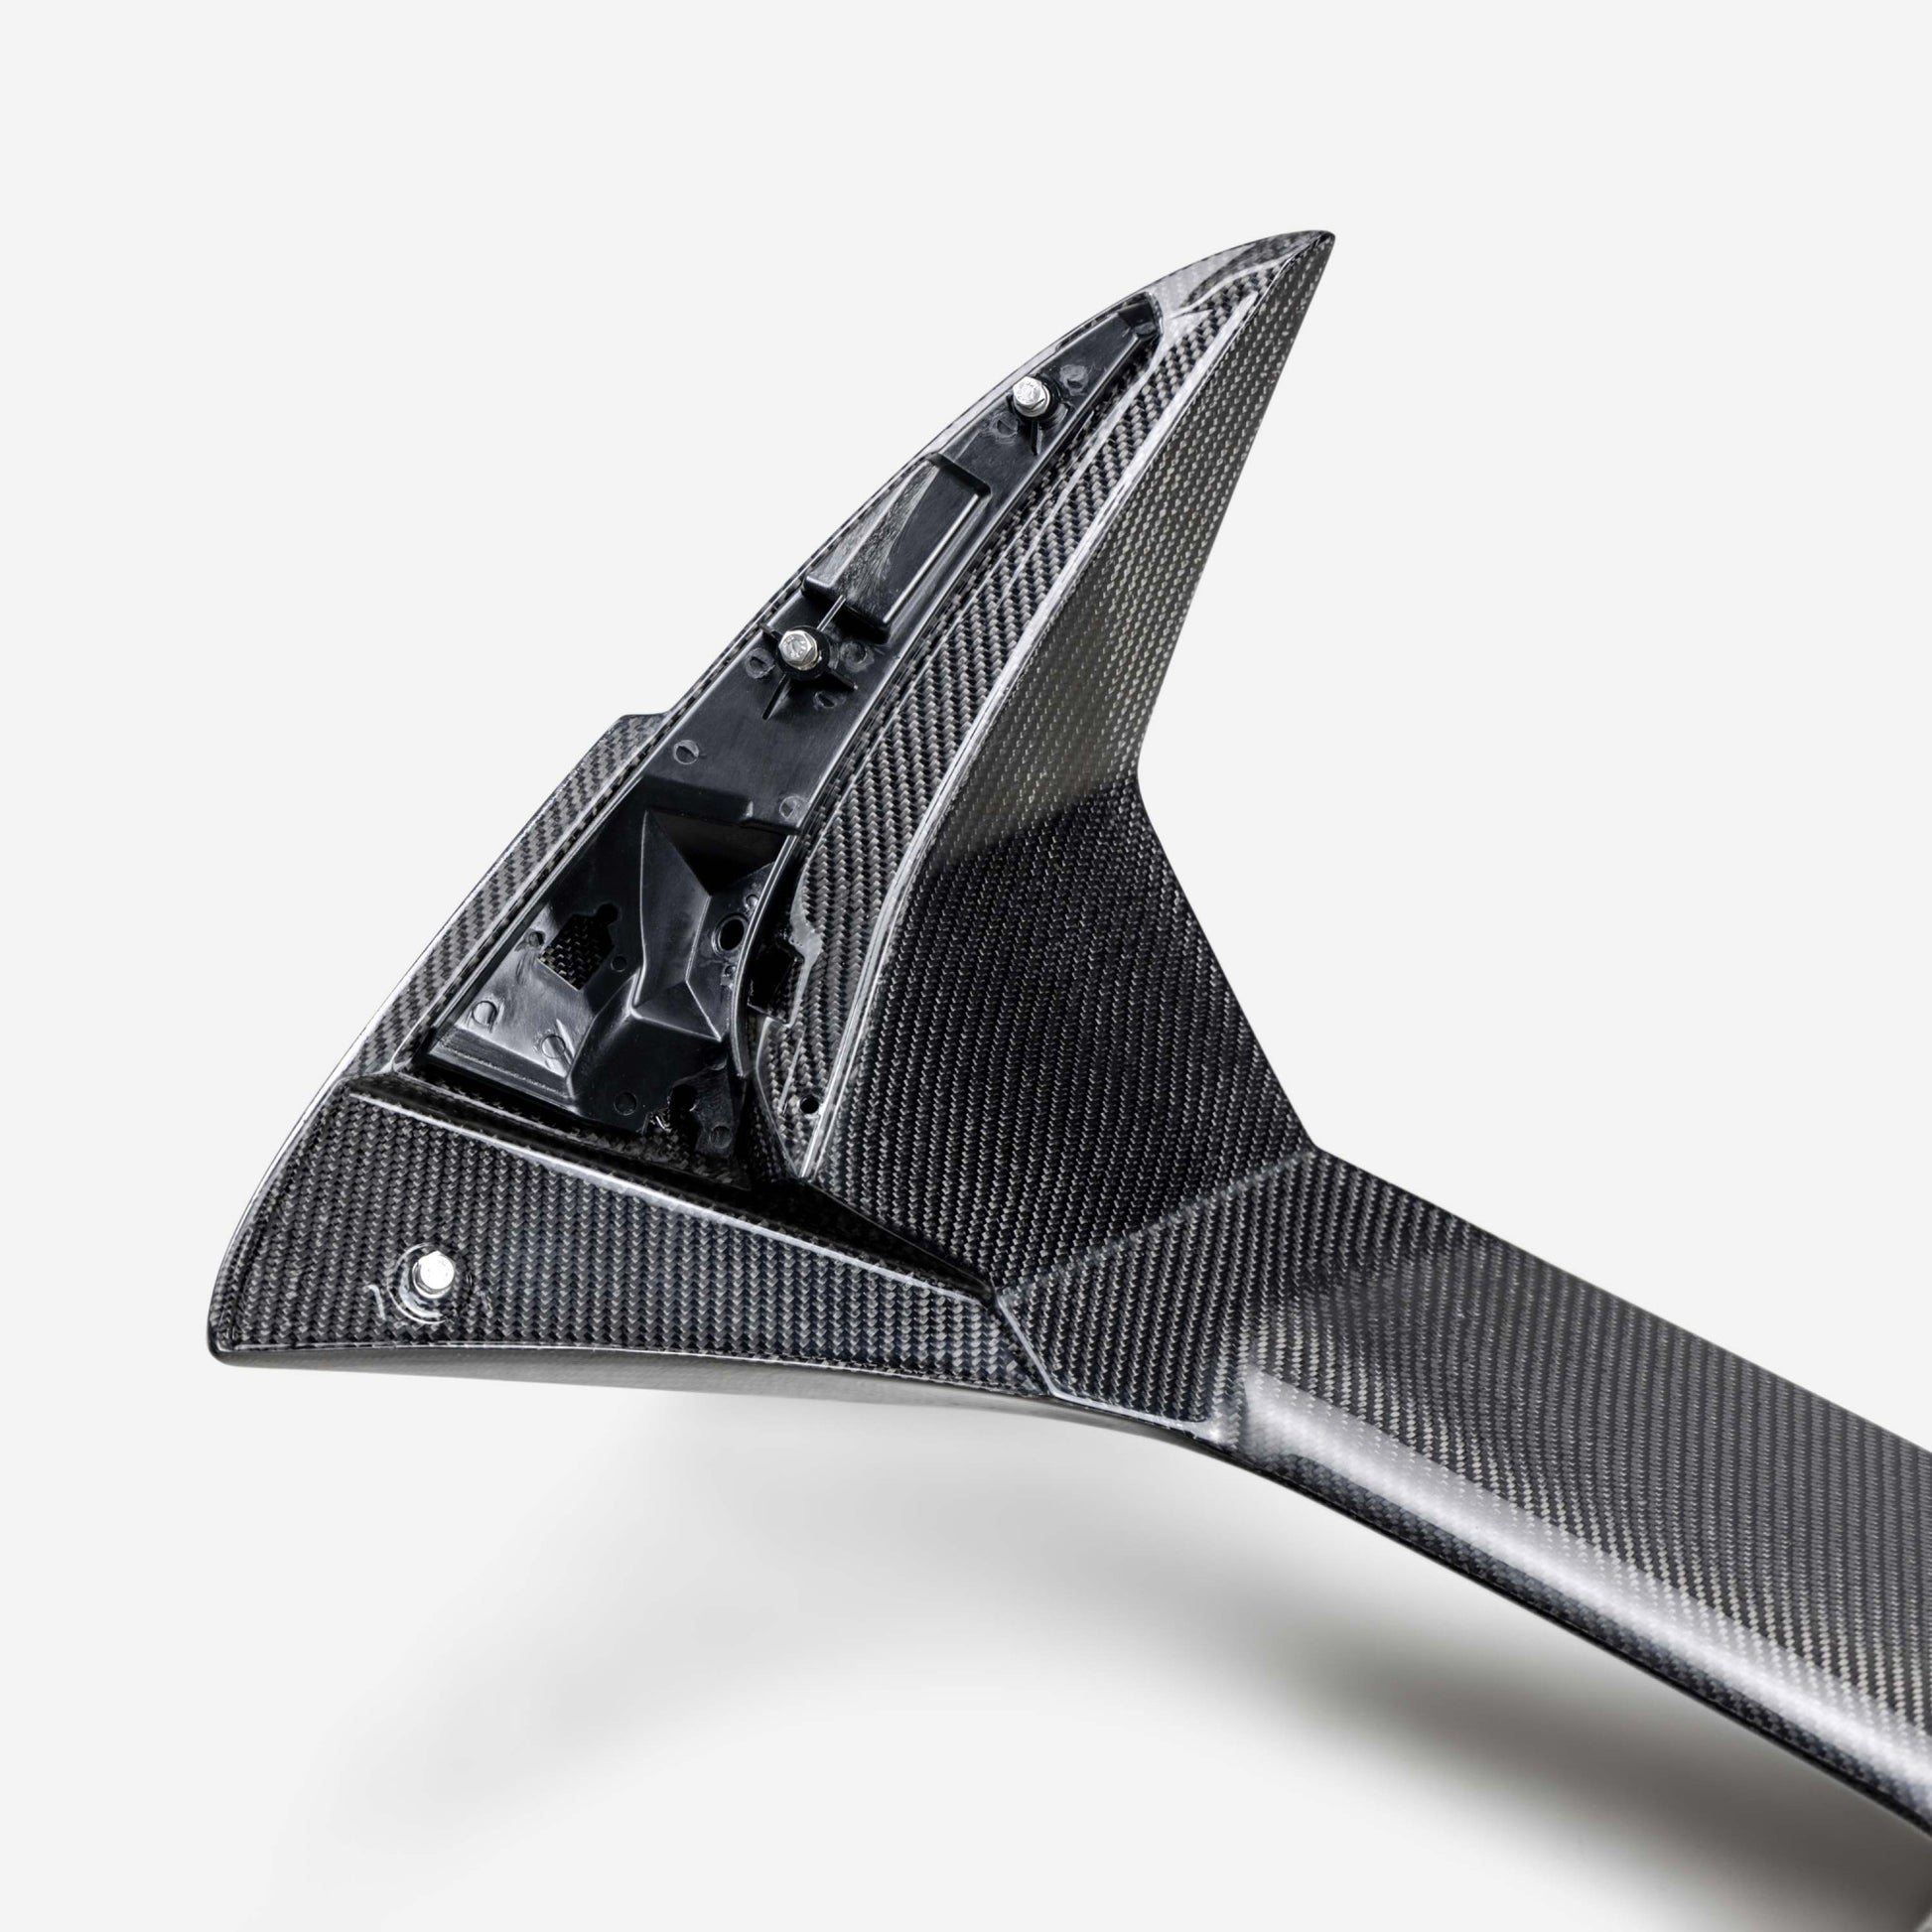 


Seibon Carbon components are carefully hand-crafted using only the finest materials. Our production team offers superior craftsmanship with over 20 years of experRear SpoilerSeibon Carbon